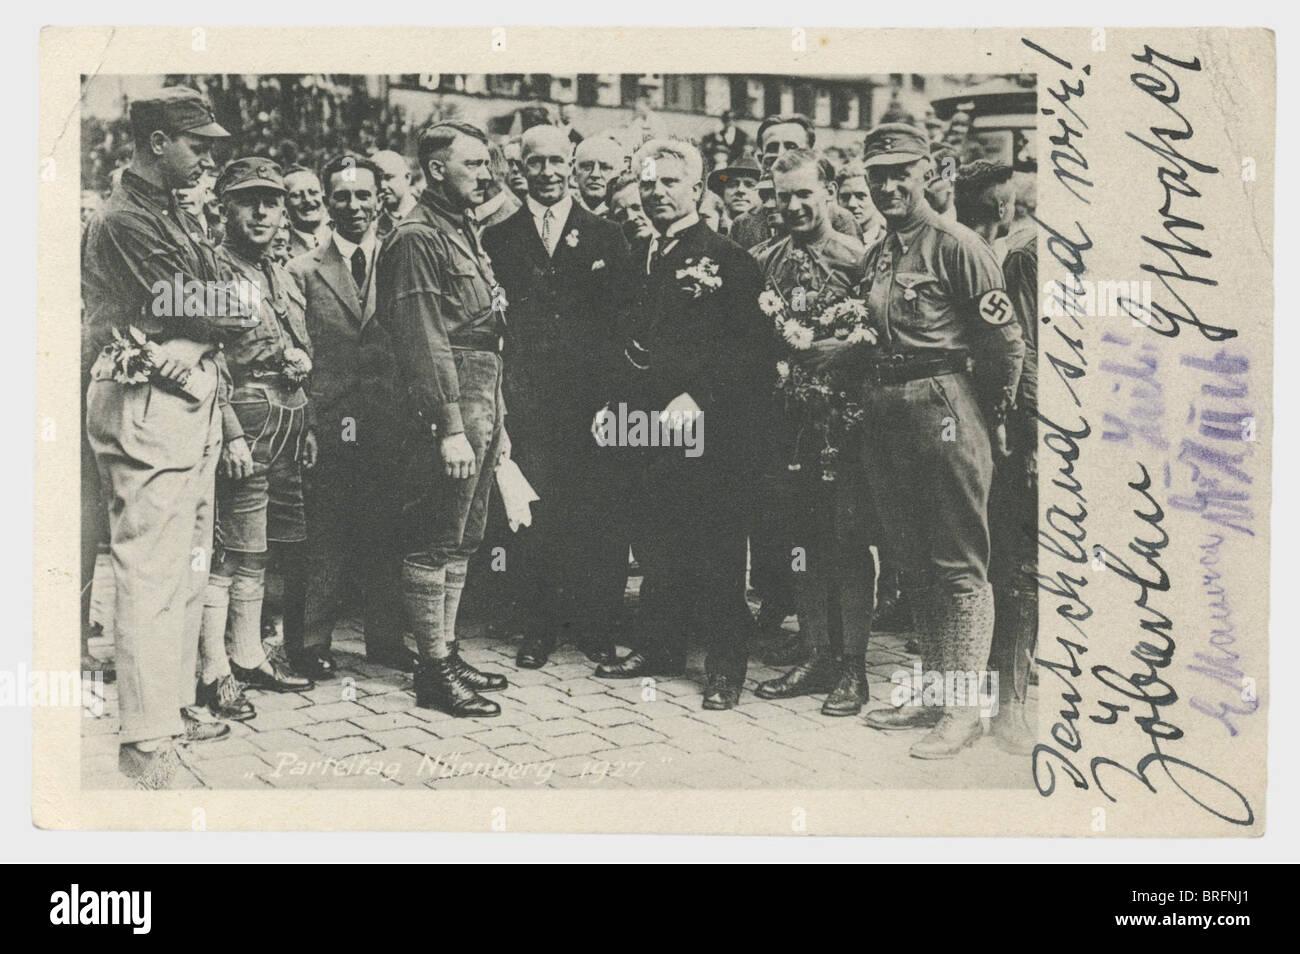 Hermine Hoffmann - picture postcard from the Reich Party Congress 1927 with the signatures of Adolf Hitler,Rudolf Heß,Hermann Esser,Joseph Goebbels,Gottfried Feder,Alfred Rosenberg,F.X. Schwarz,Julius Streicher,Arthur Dinter,Adolf Hühnlein,Walte,signed in ink,pencil,and indelible pencil. Picture postcard(transl.)'Party congress Nuremberg 1927',a group picture showing Hitler wearing lederhosen,Gottfried Feder and Arthur Dinter in the centre,flanked by Goebbels,Hühnlein and other signers. On the edge written in ink(transl.)'We are Germany! Zö,Additional-Rights-Clearences-Not Available Stock Photo